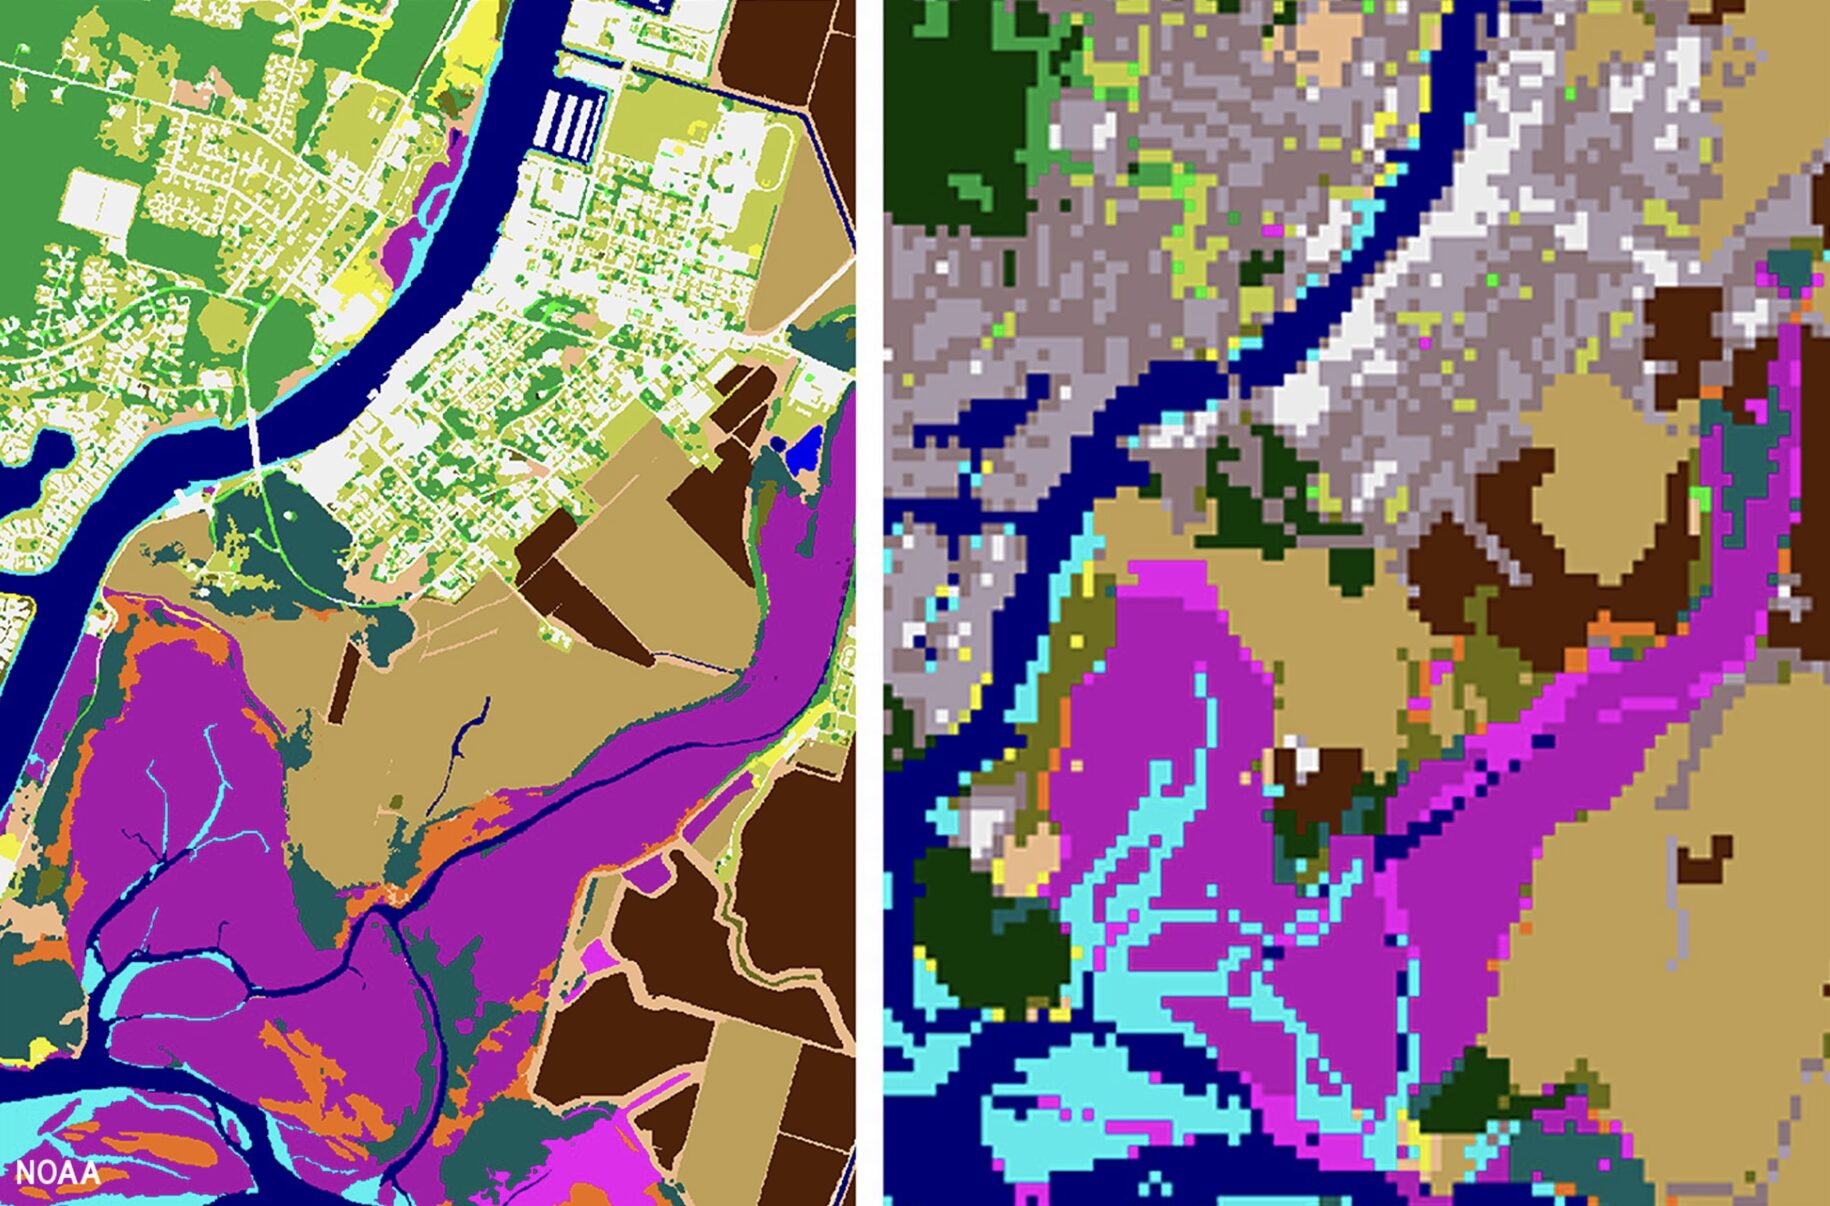 Map created by NOAA comparing high resolution land cover data to high-resolution land cover data